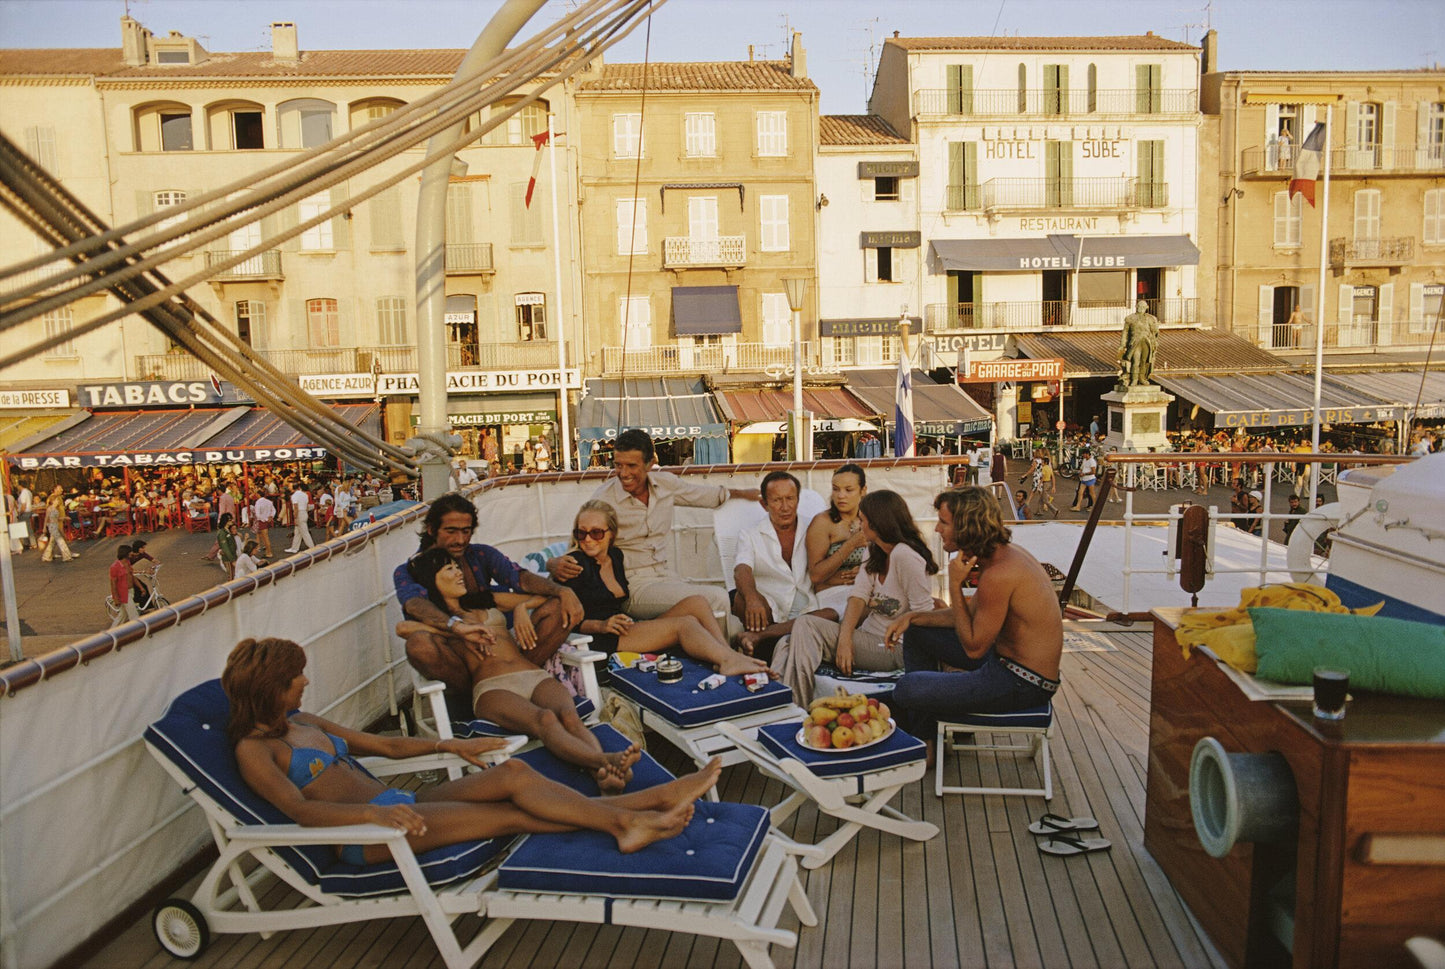 Slim Aarons: Saint-Tropez photo for sale Getty Images Gallery